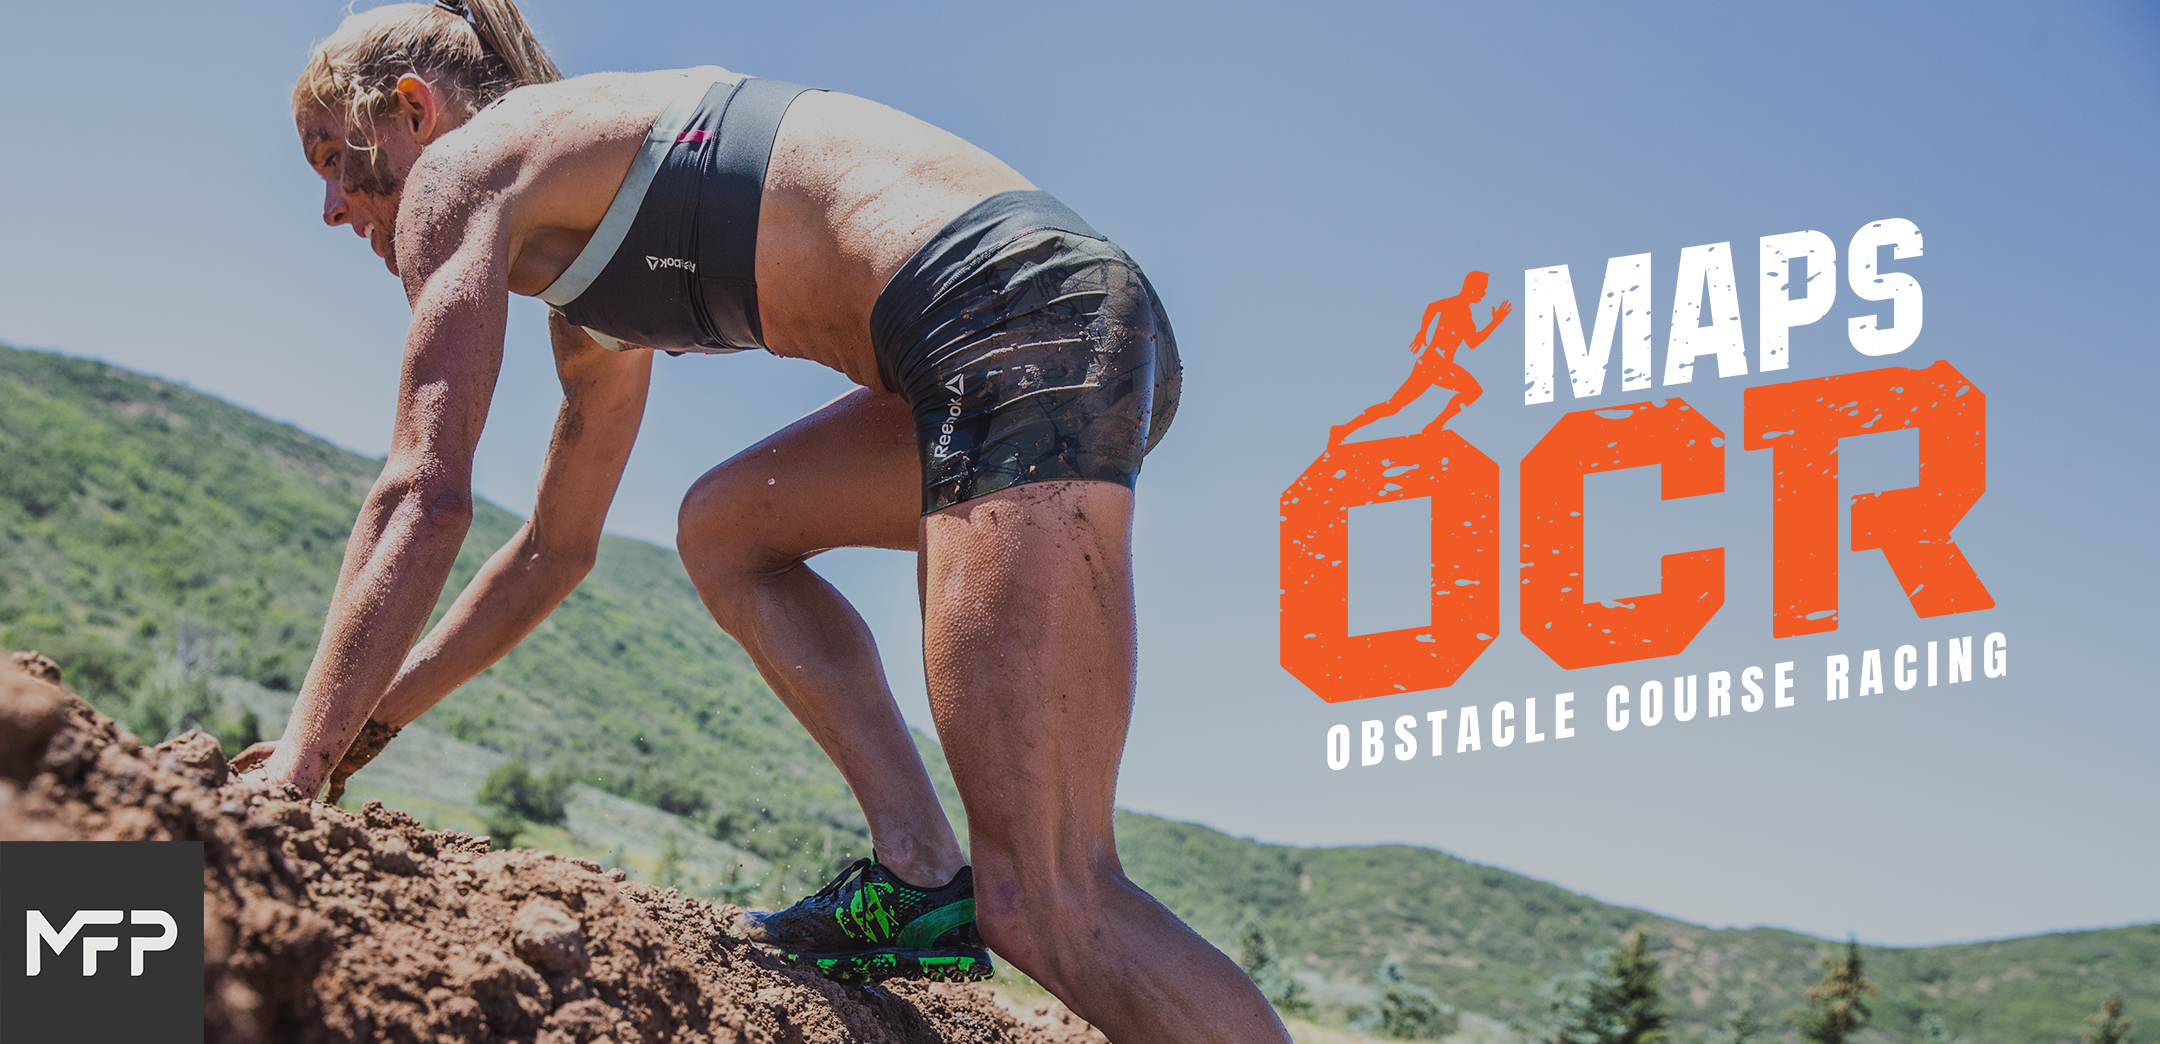 MAPS OCR - Obstacle Course Racing